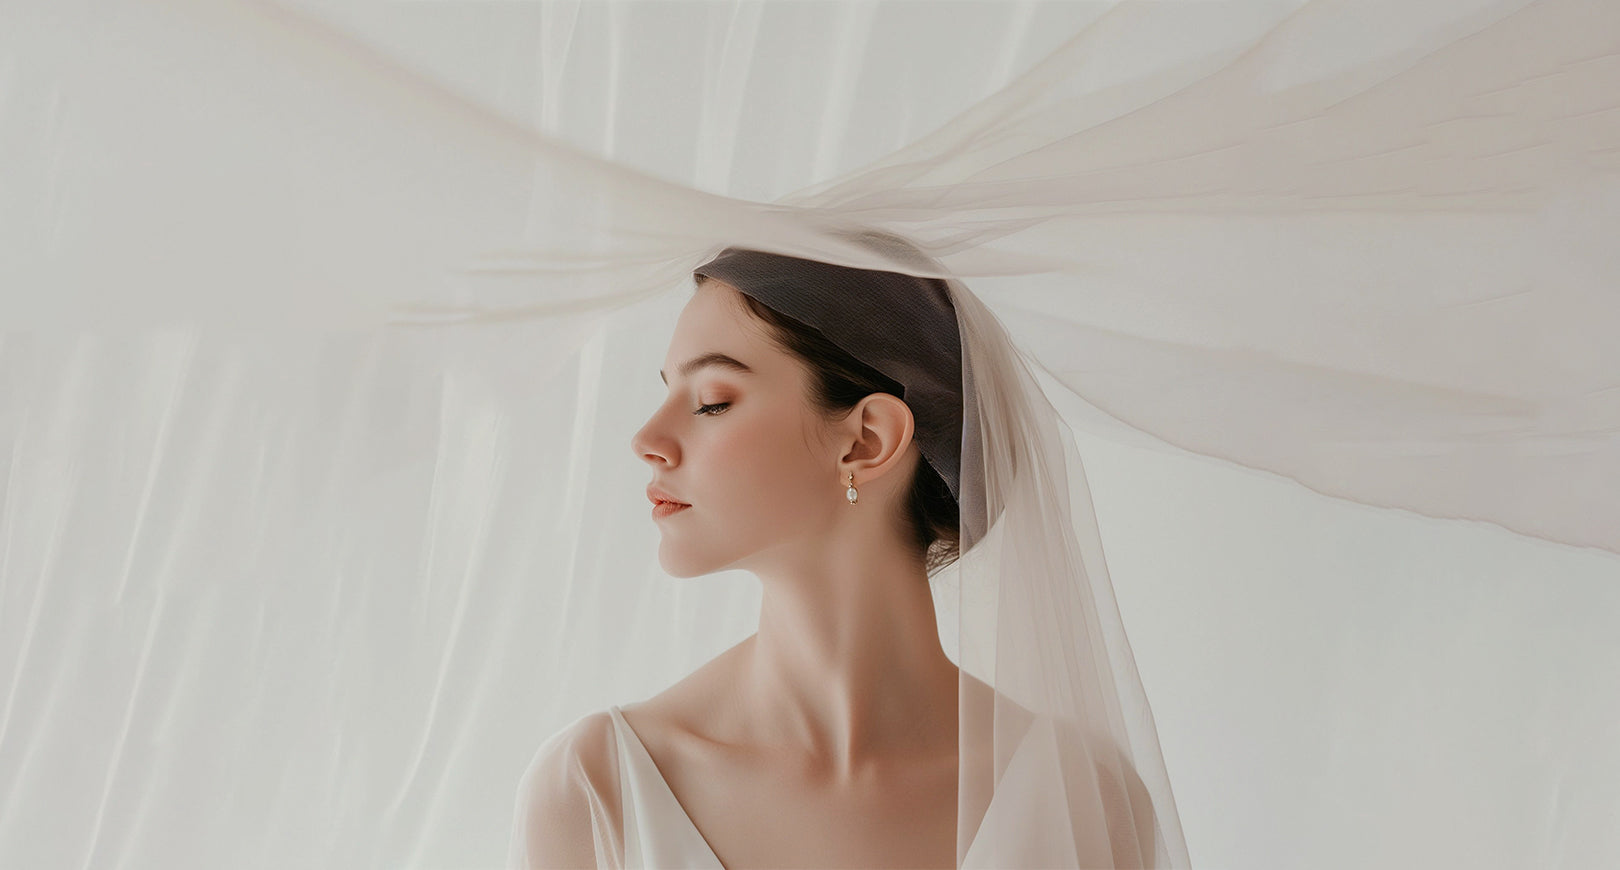 The Veiled Tradition: Brides and Their Walk Down the Aisle